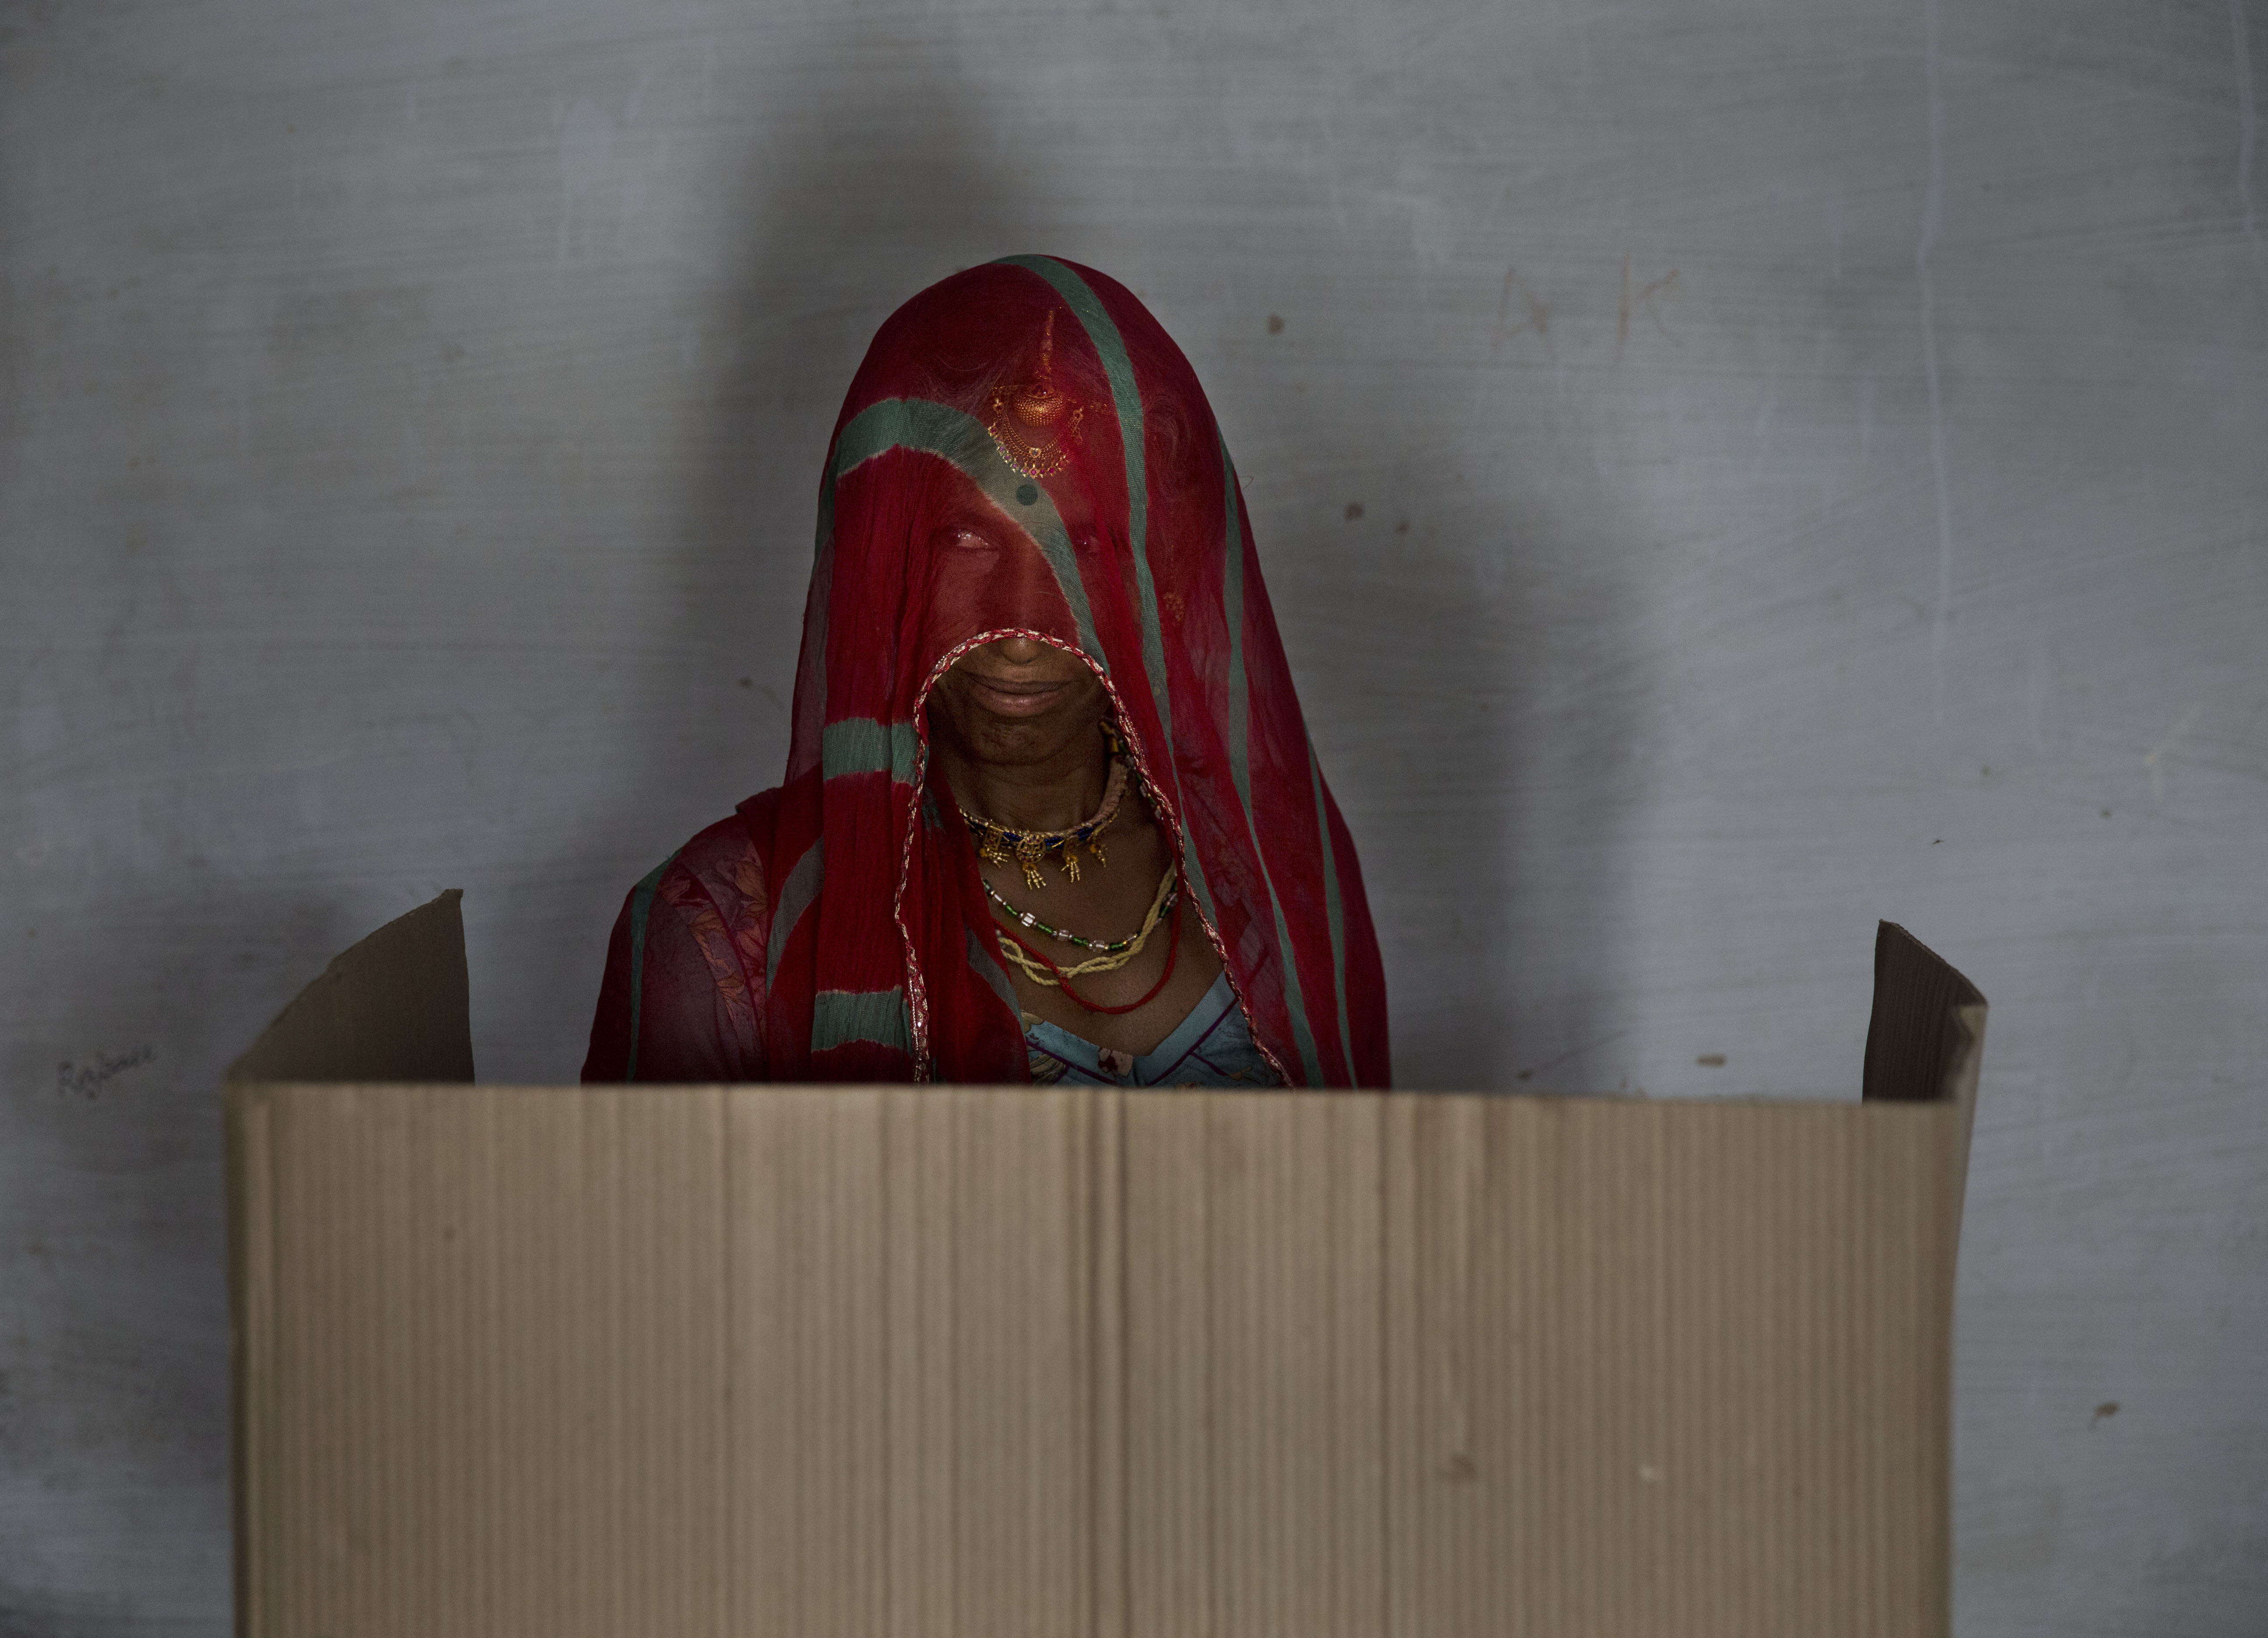 A woman casts her ballot at a polling station on April 17, 2014 in the Jodhpur District in the desert state of Rajasthan.